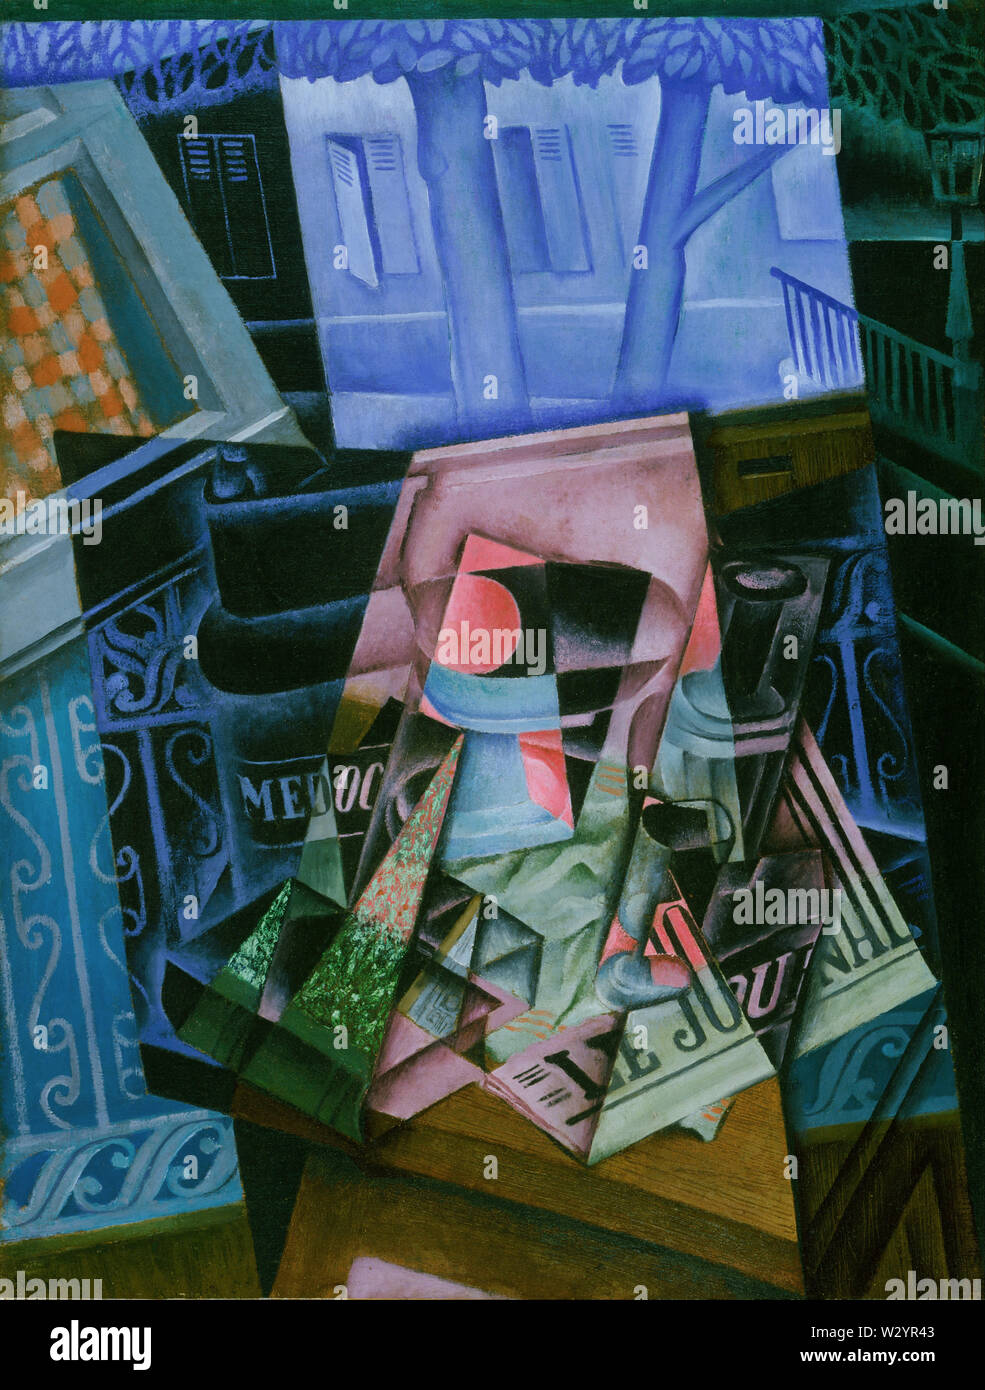 Still Life before an Open Window, Place Ravignan (1915) painting by Juan Gris - Very high resolution and quality image Stock Photo